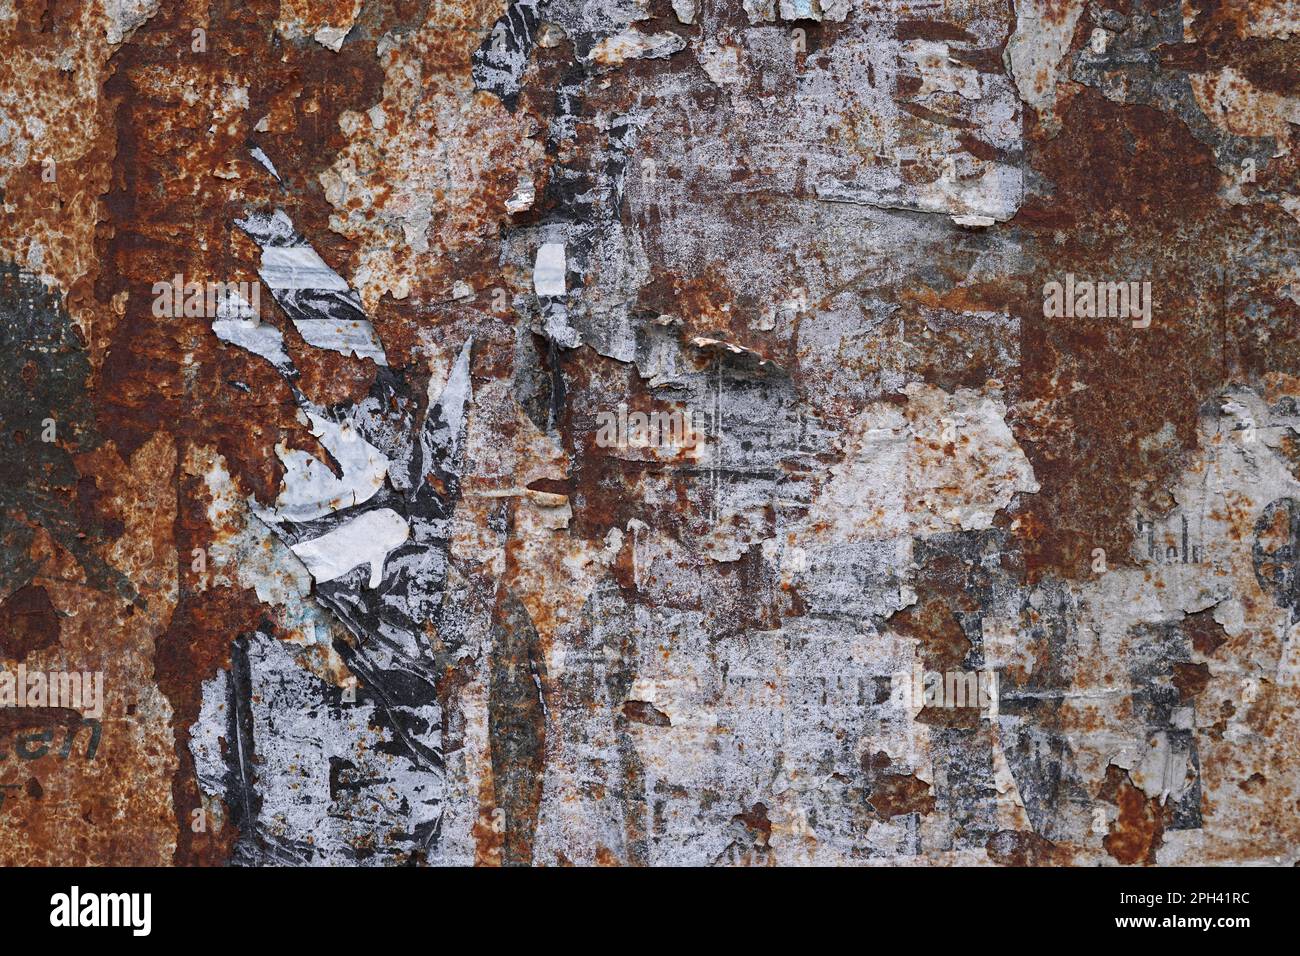 rusty metal grunge background with peeling poster scraps Stock Photo